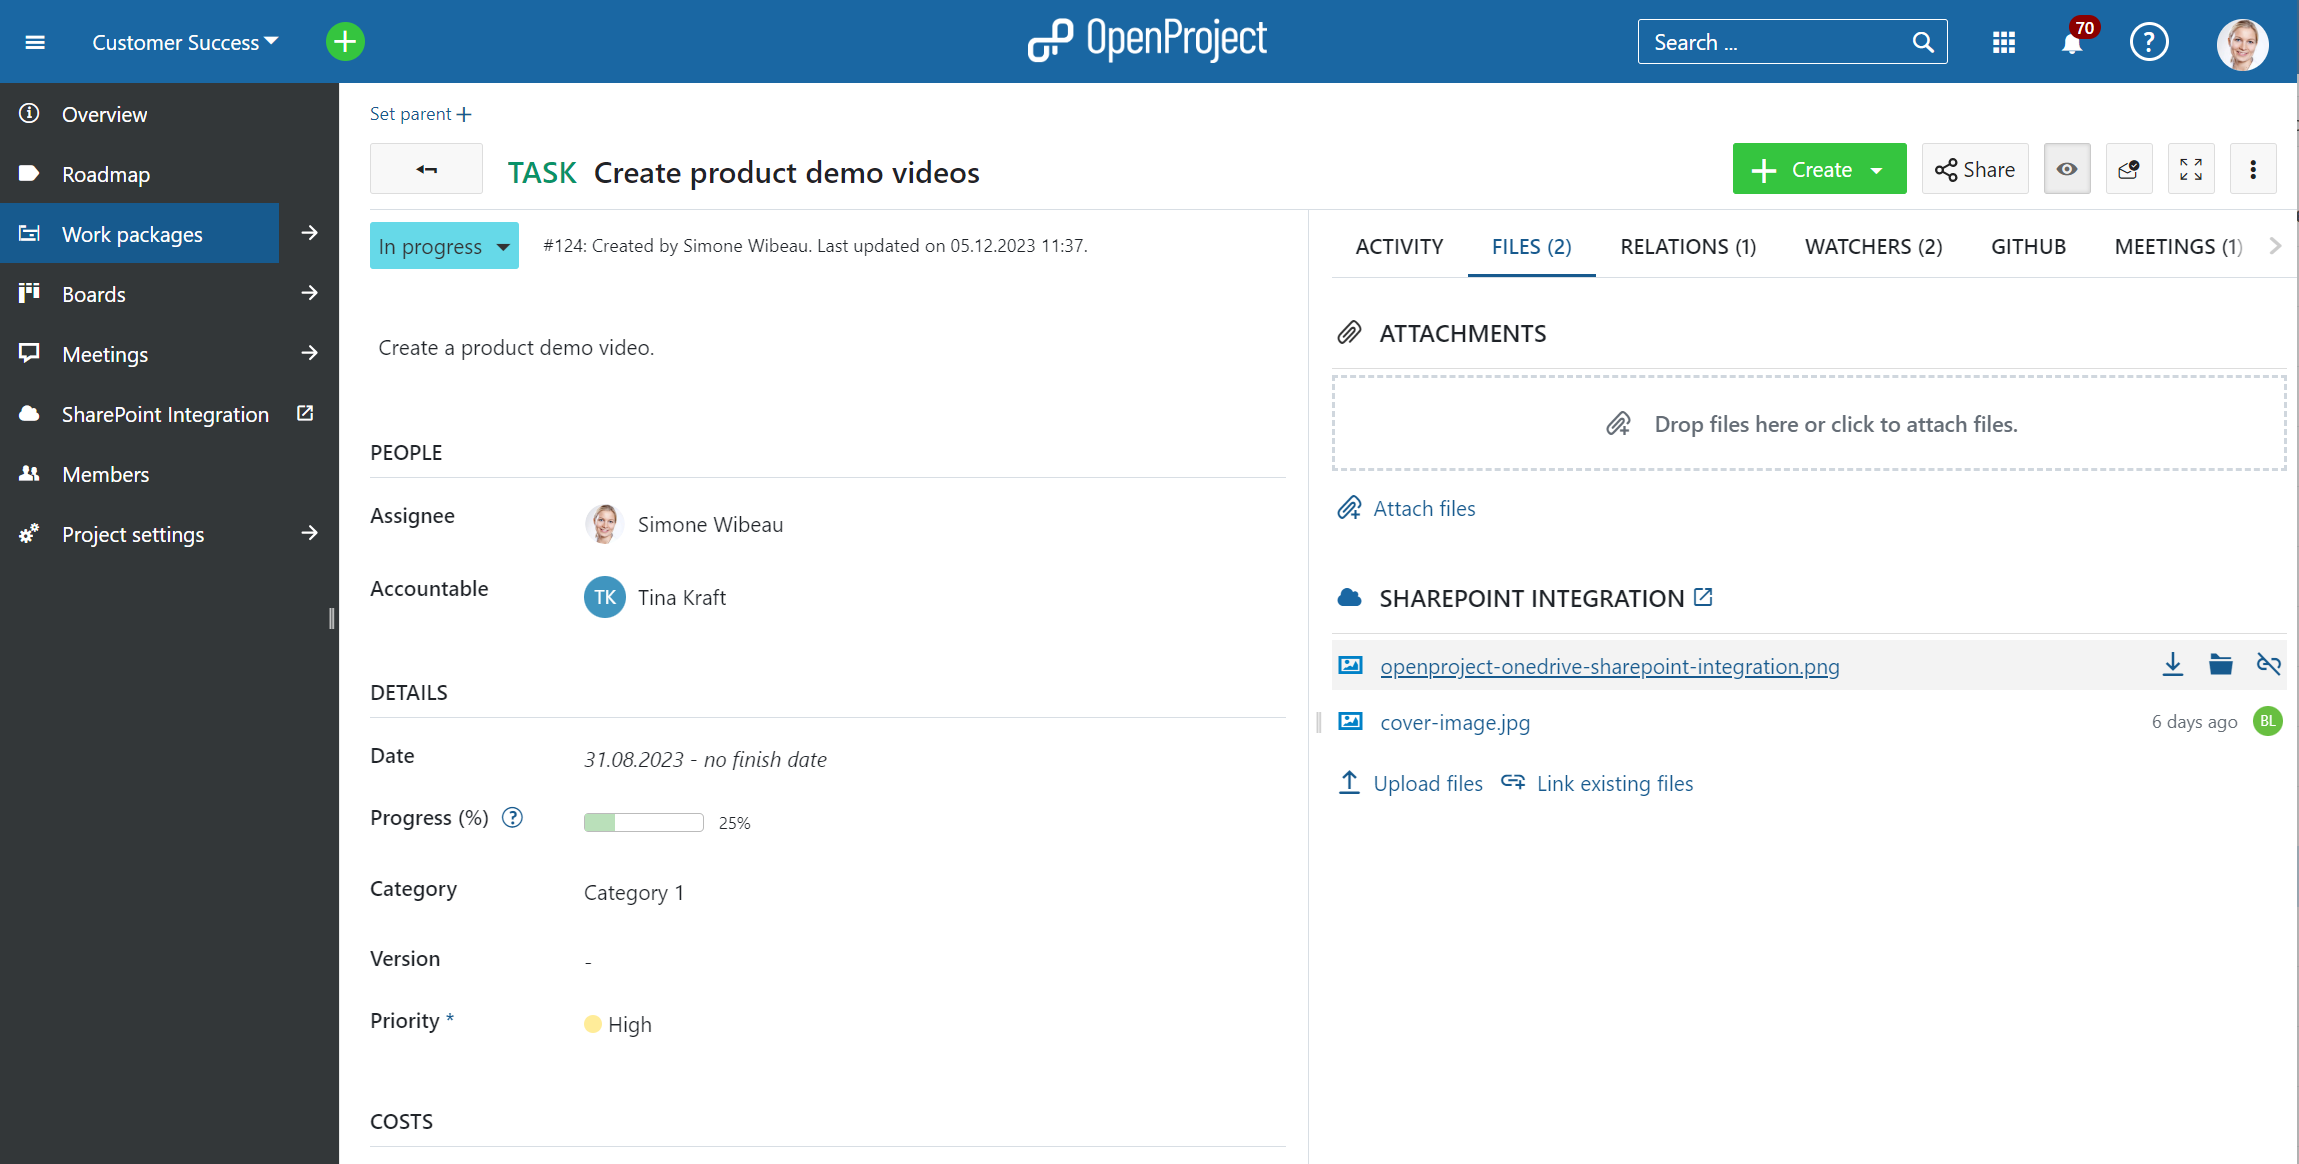 SharePoint integration in OpenProject